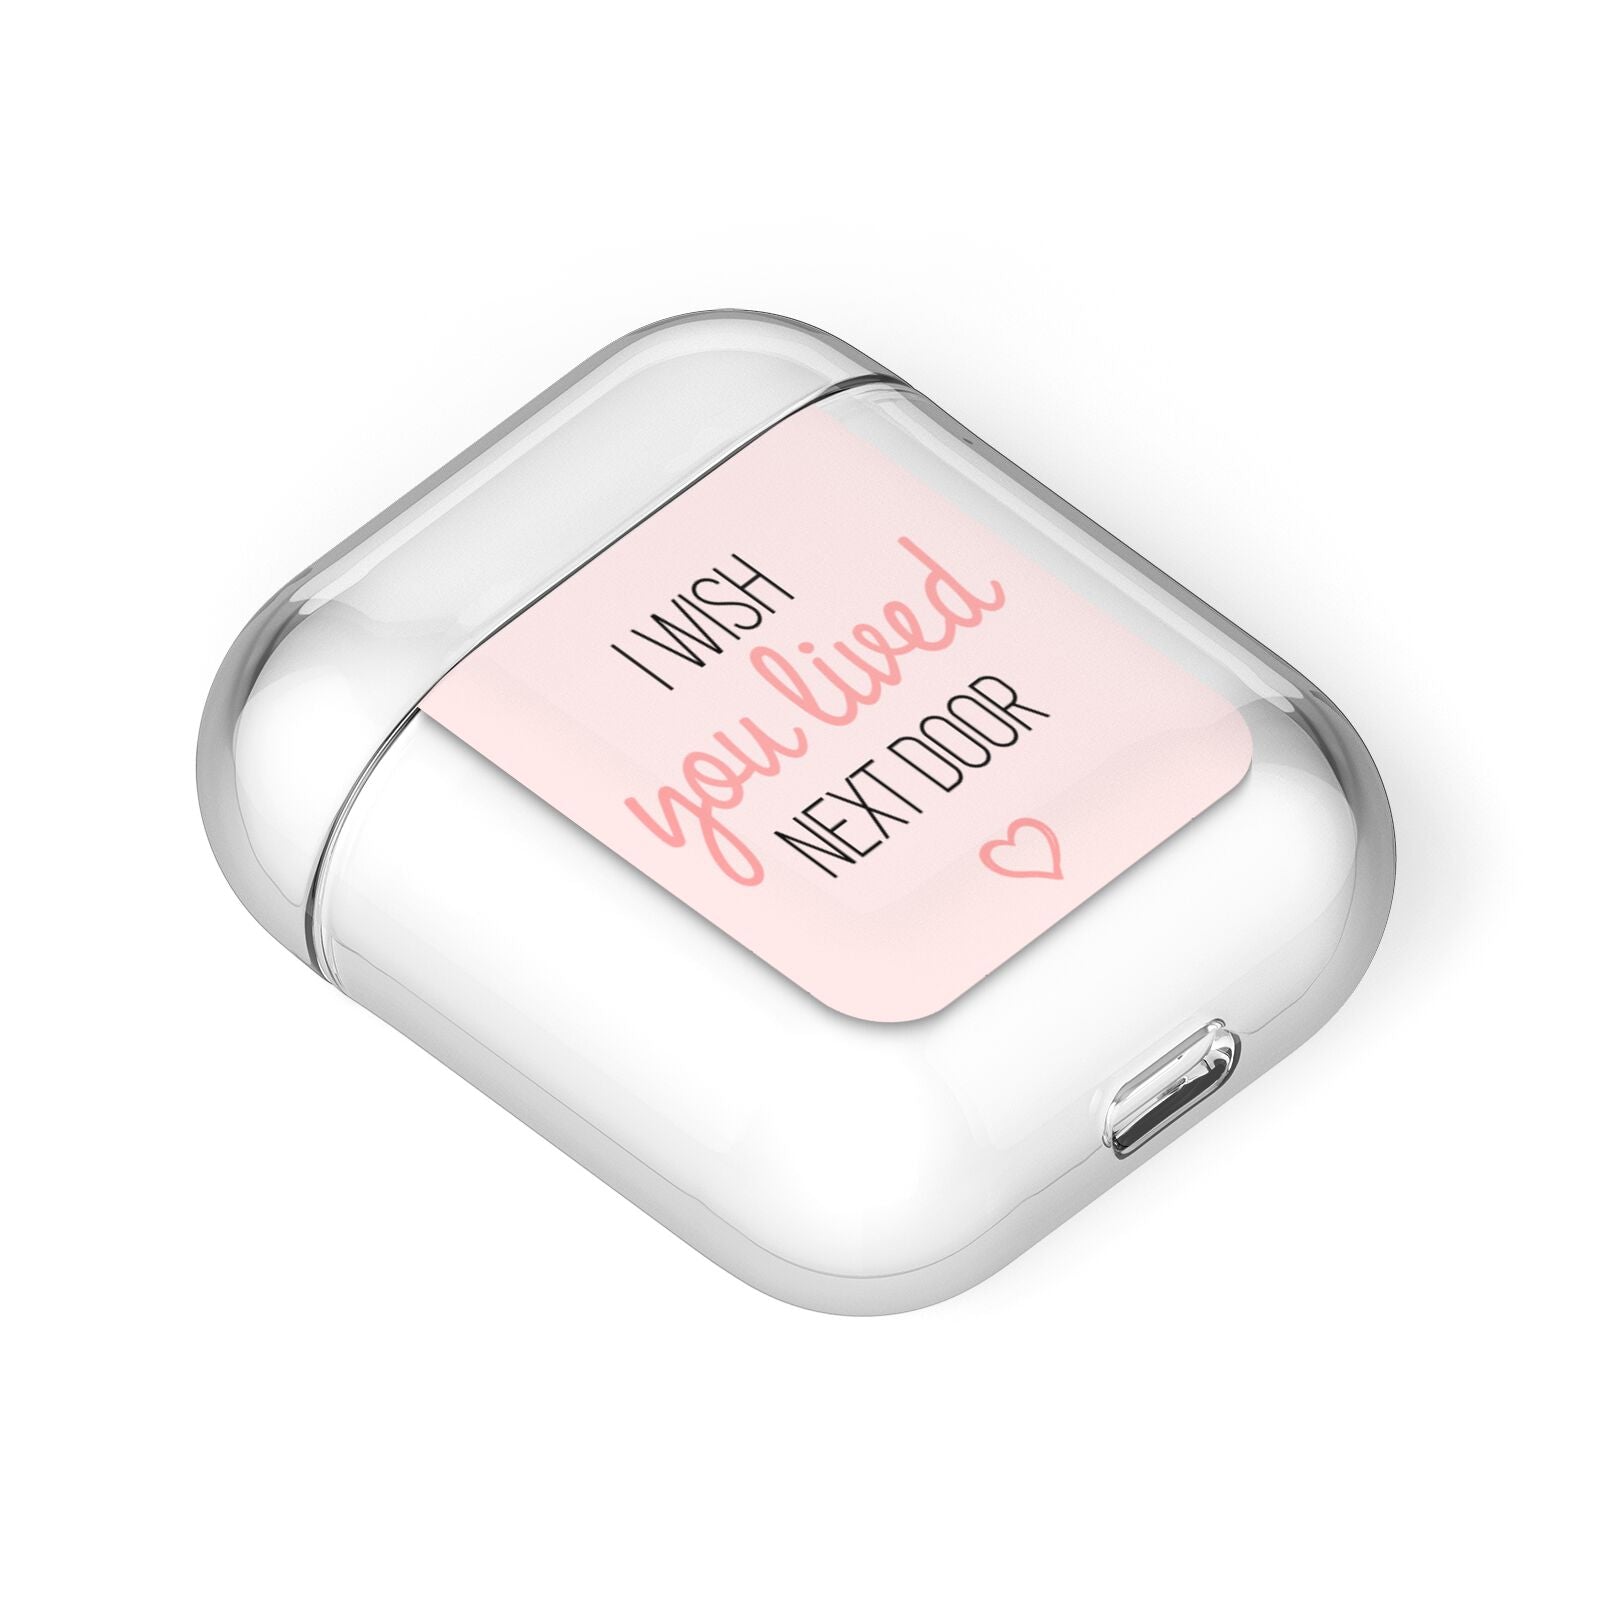 Pink Wish You Were Here AirPods Case Laid Flat